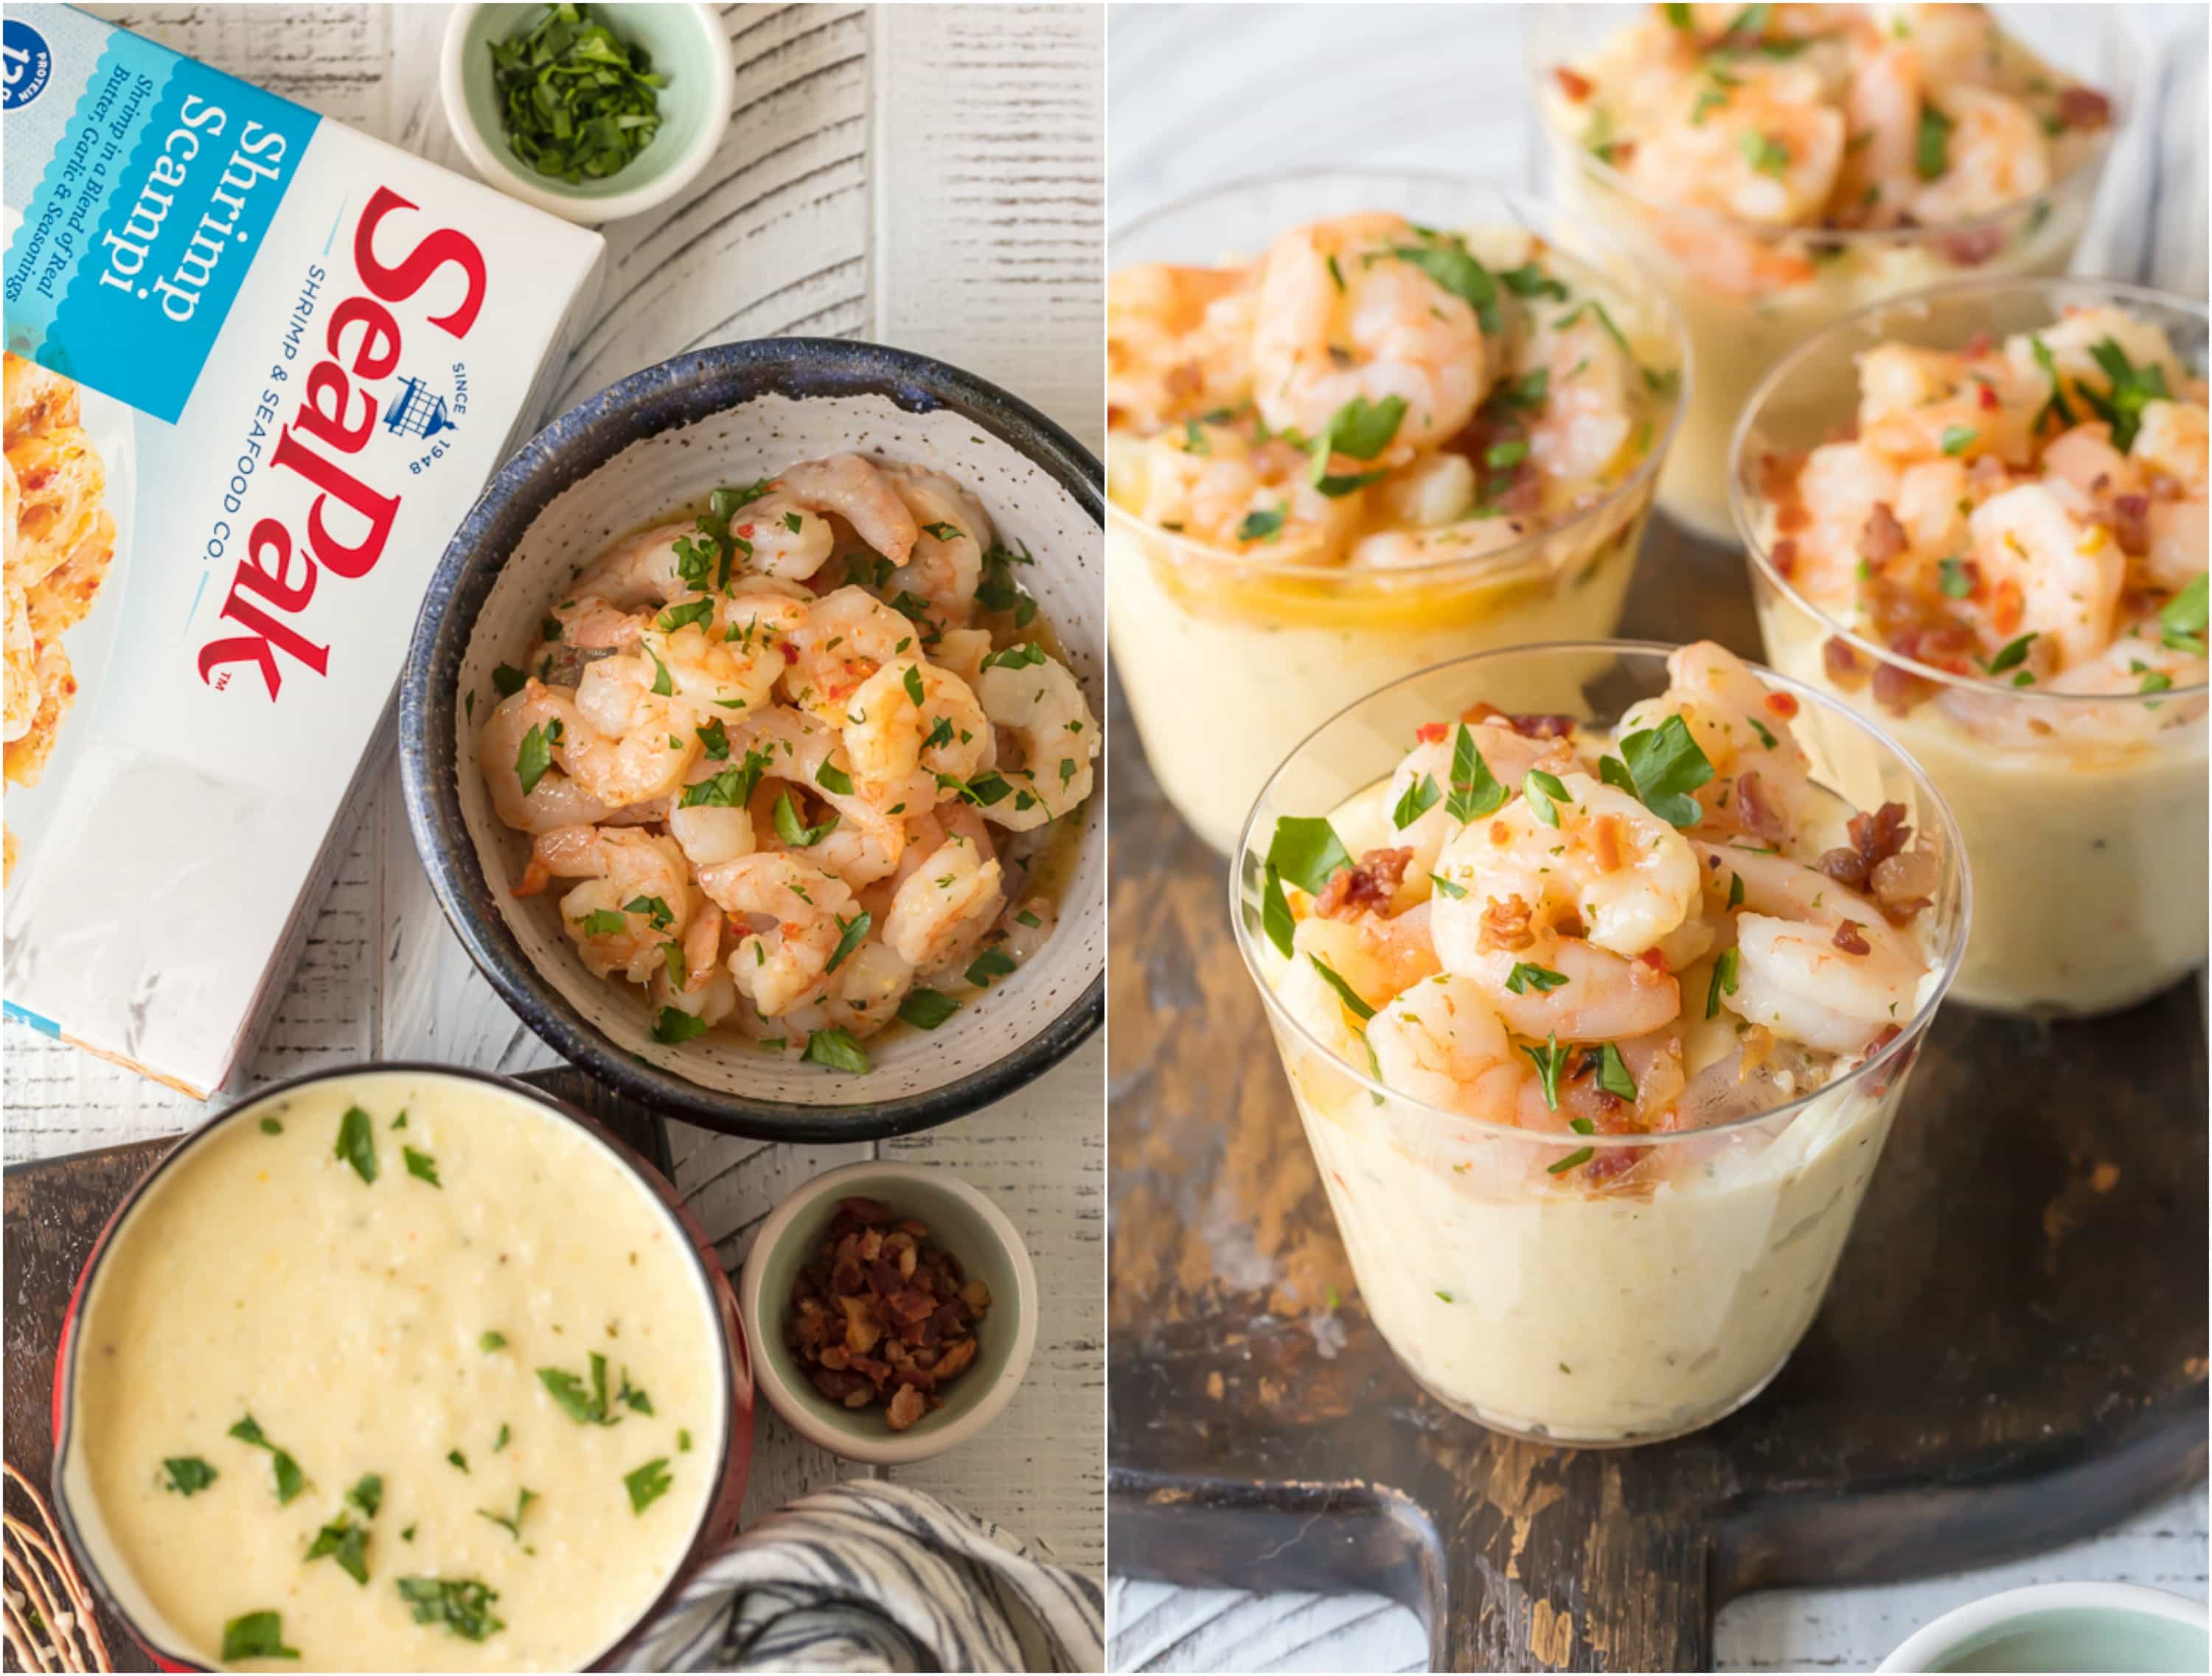 These Shrimp and Grits Appetizer Cups with Seapak shrimp